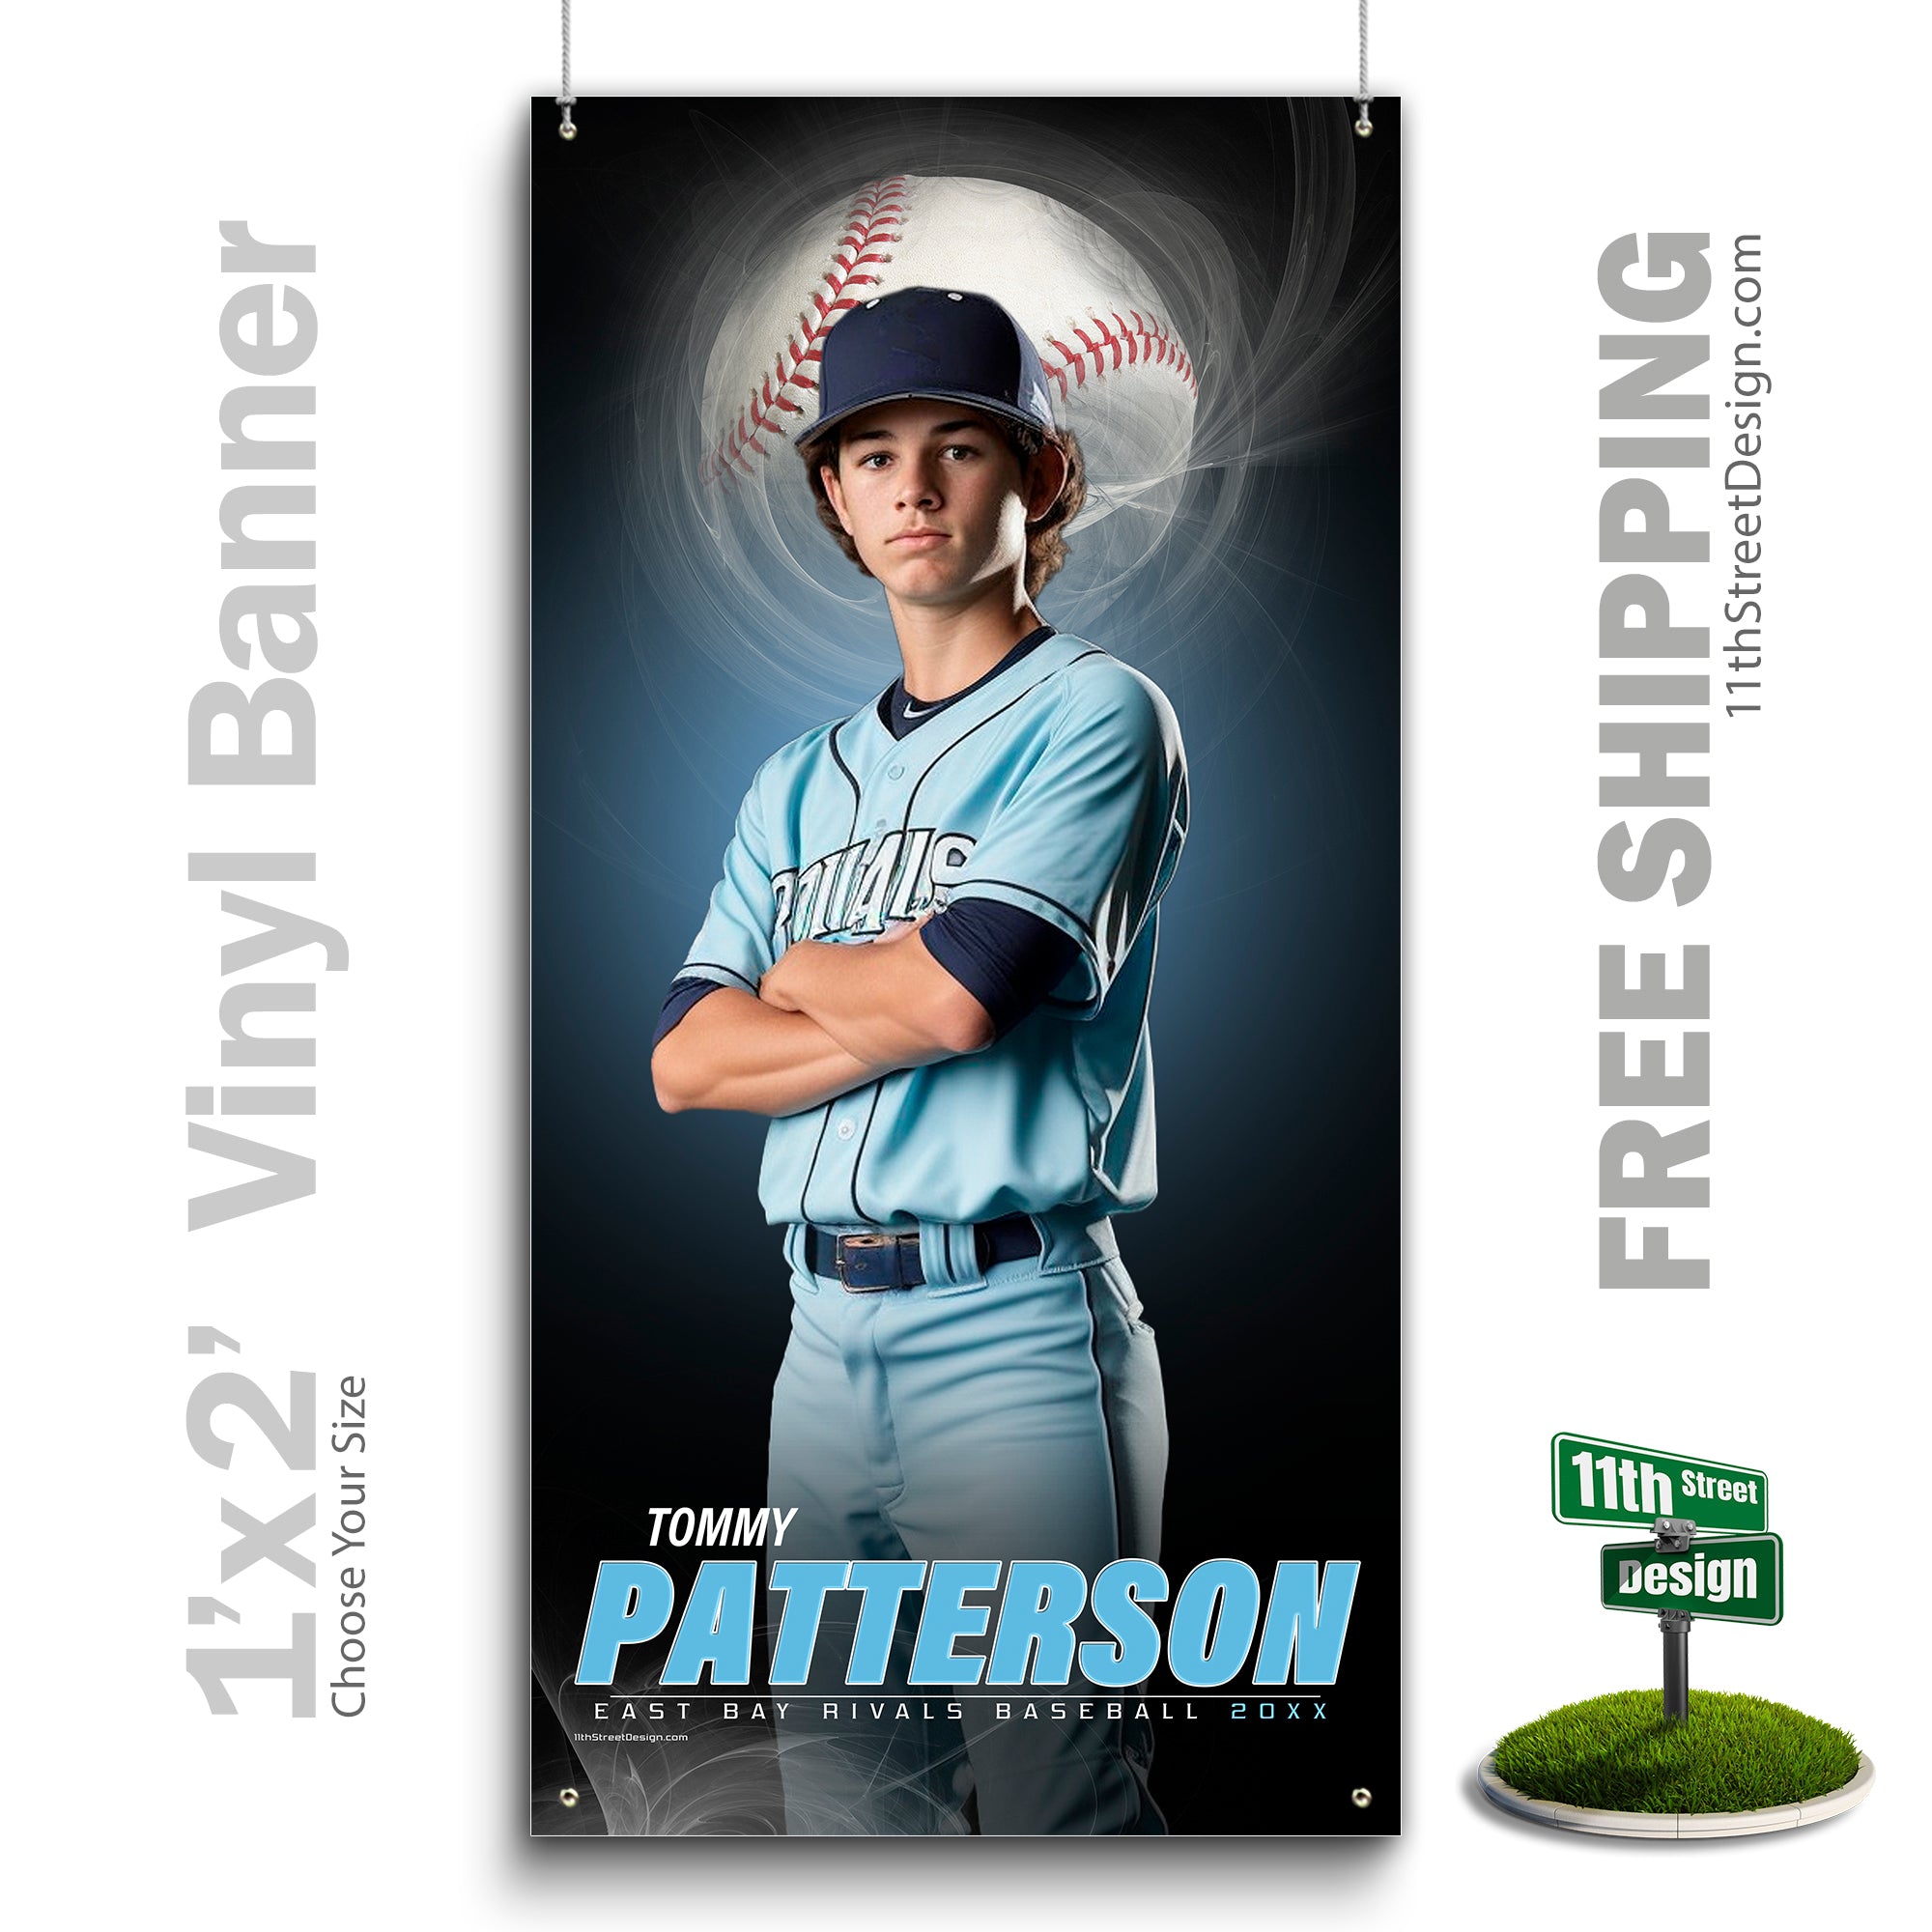 Coaches Gift, Team Gifts, Poster Print, Personalized Poster, Senior Night, Senior Poster, Sport Gift, Sports Collage, Sports Prints, Custom Sports Poster, Baseball Poster, Baseball Print, Baseball Senior,